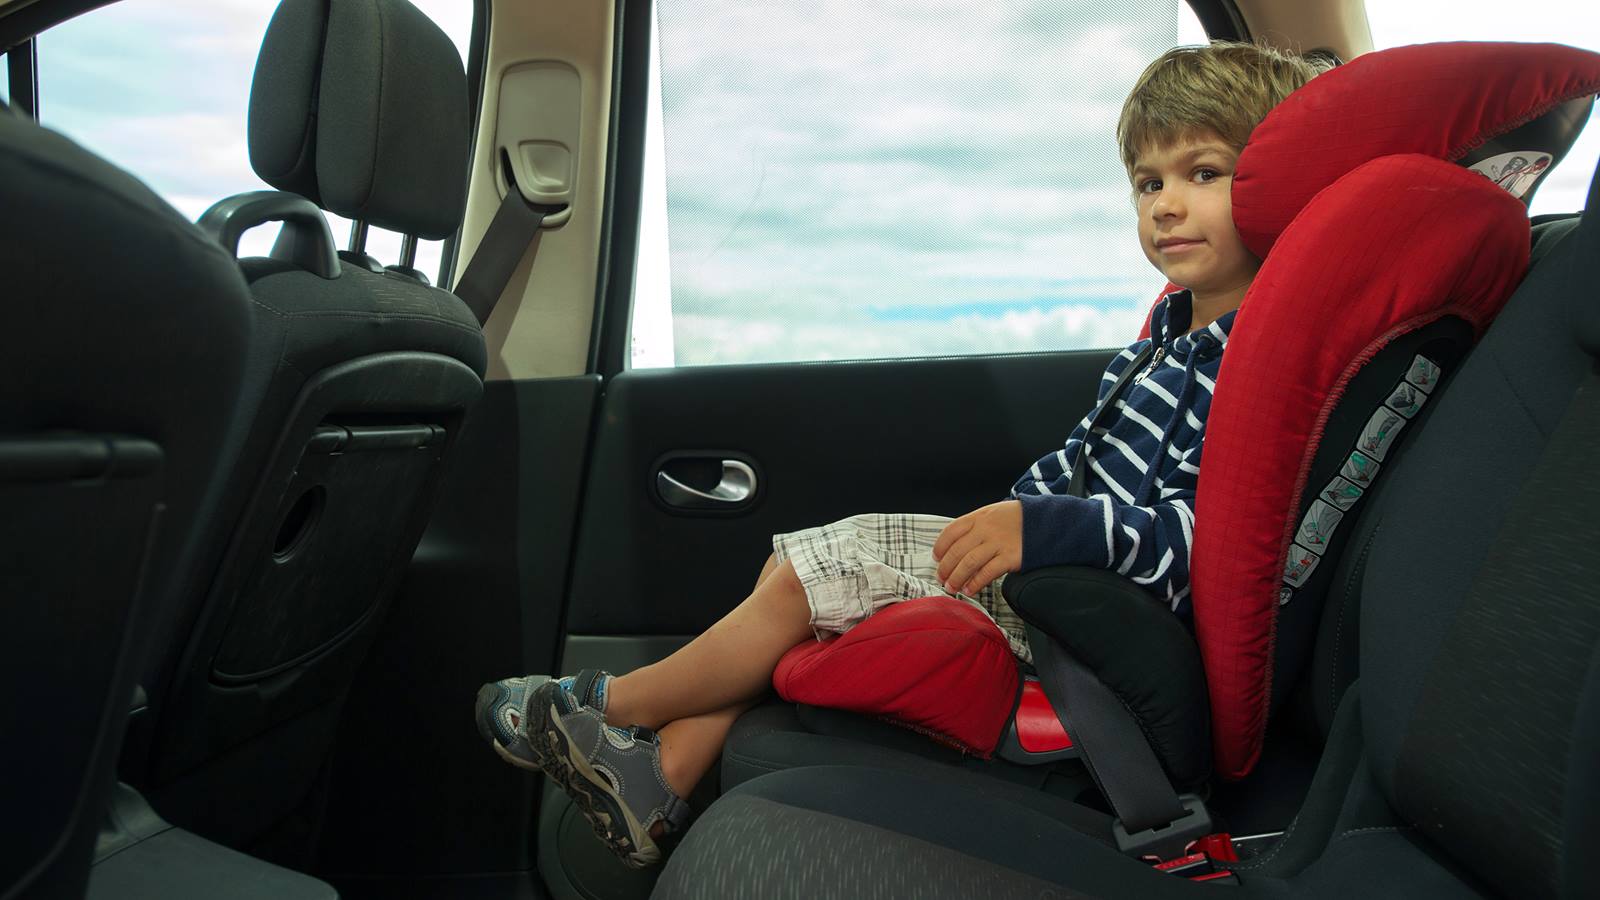 When Is My Child Ready To Move Into A Booster Seat - What Size Car Seat Do I Need For A 4 Year Old